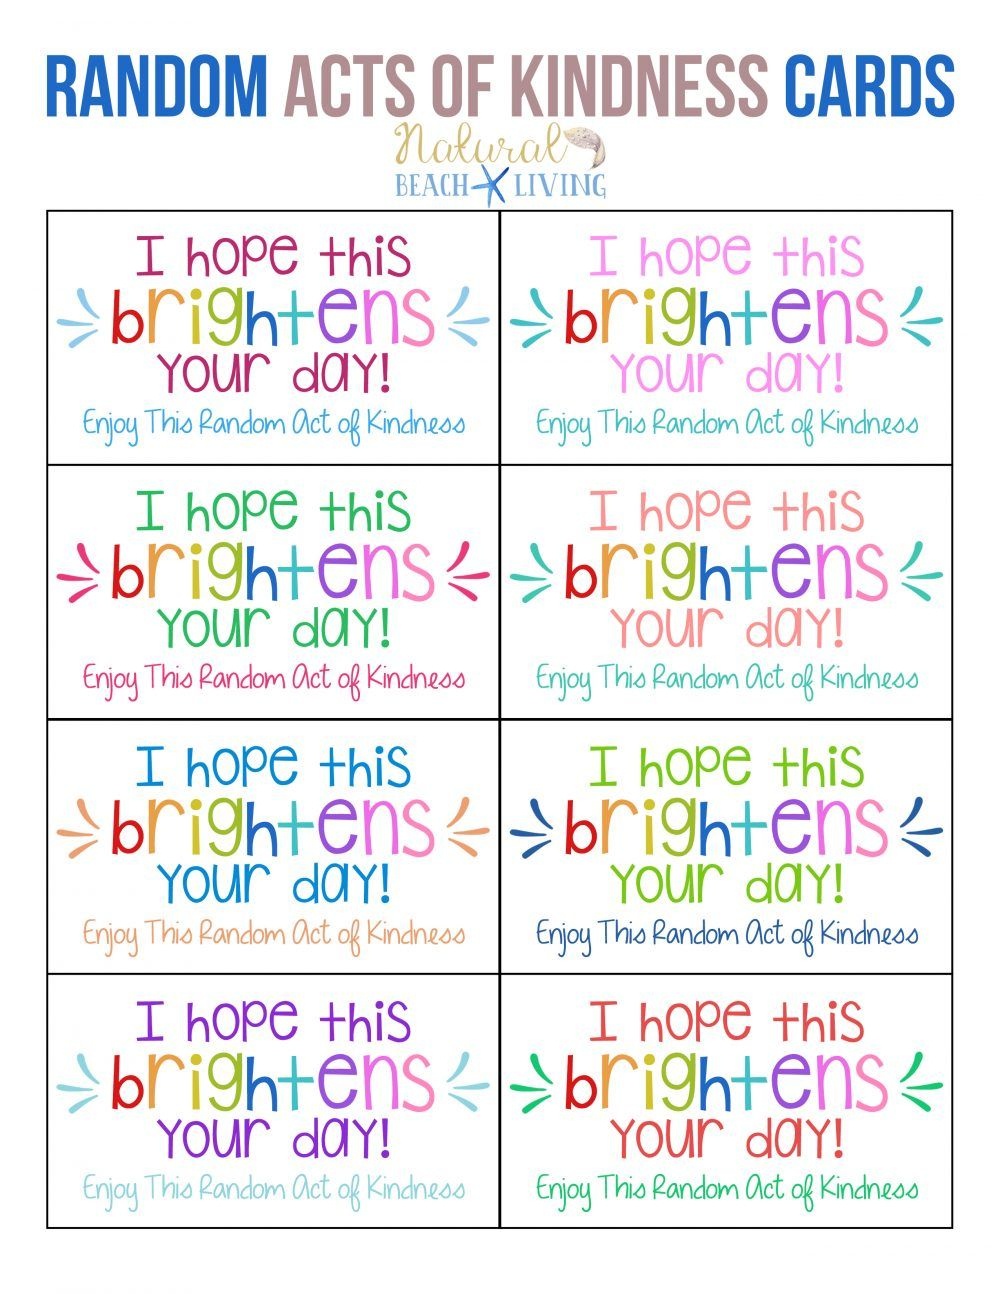 The Best Random Acts Of Kindness Printable Cards Free | Girl Scouts - Free Printable Kindness Cards